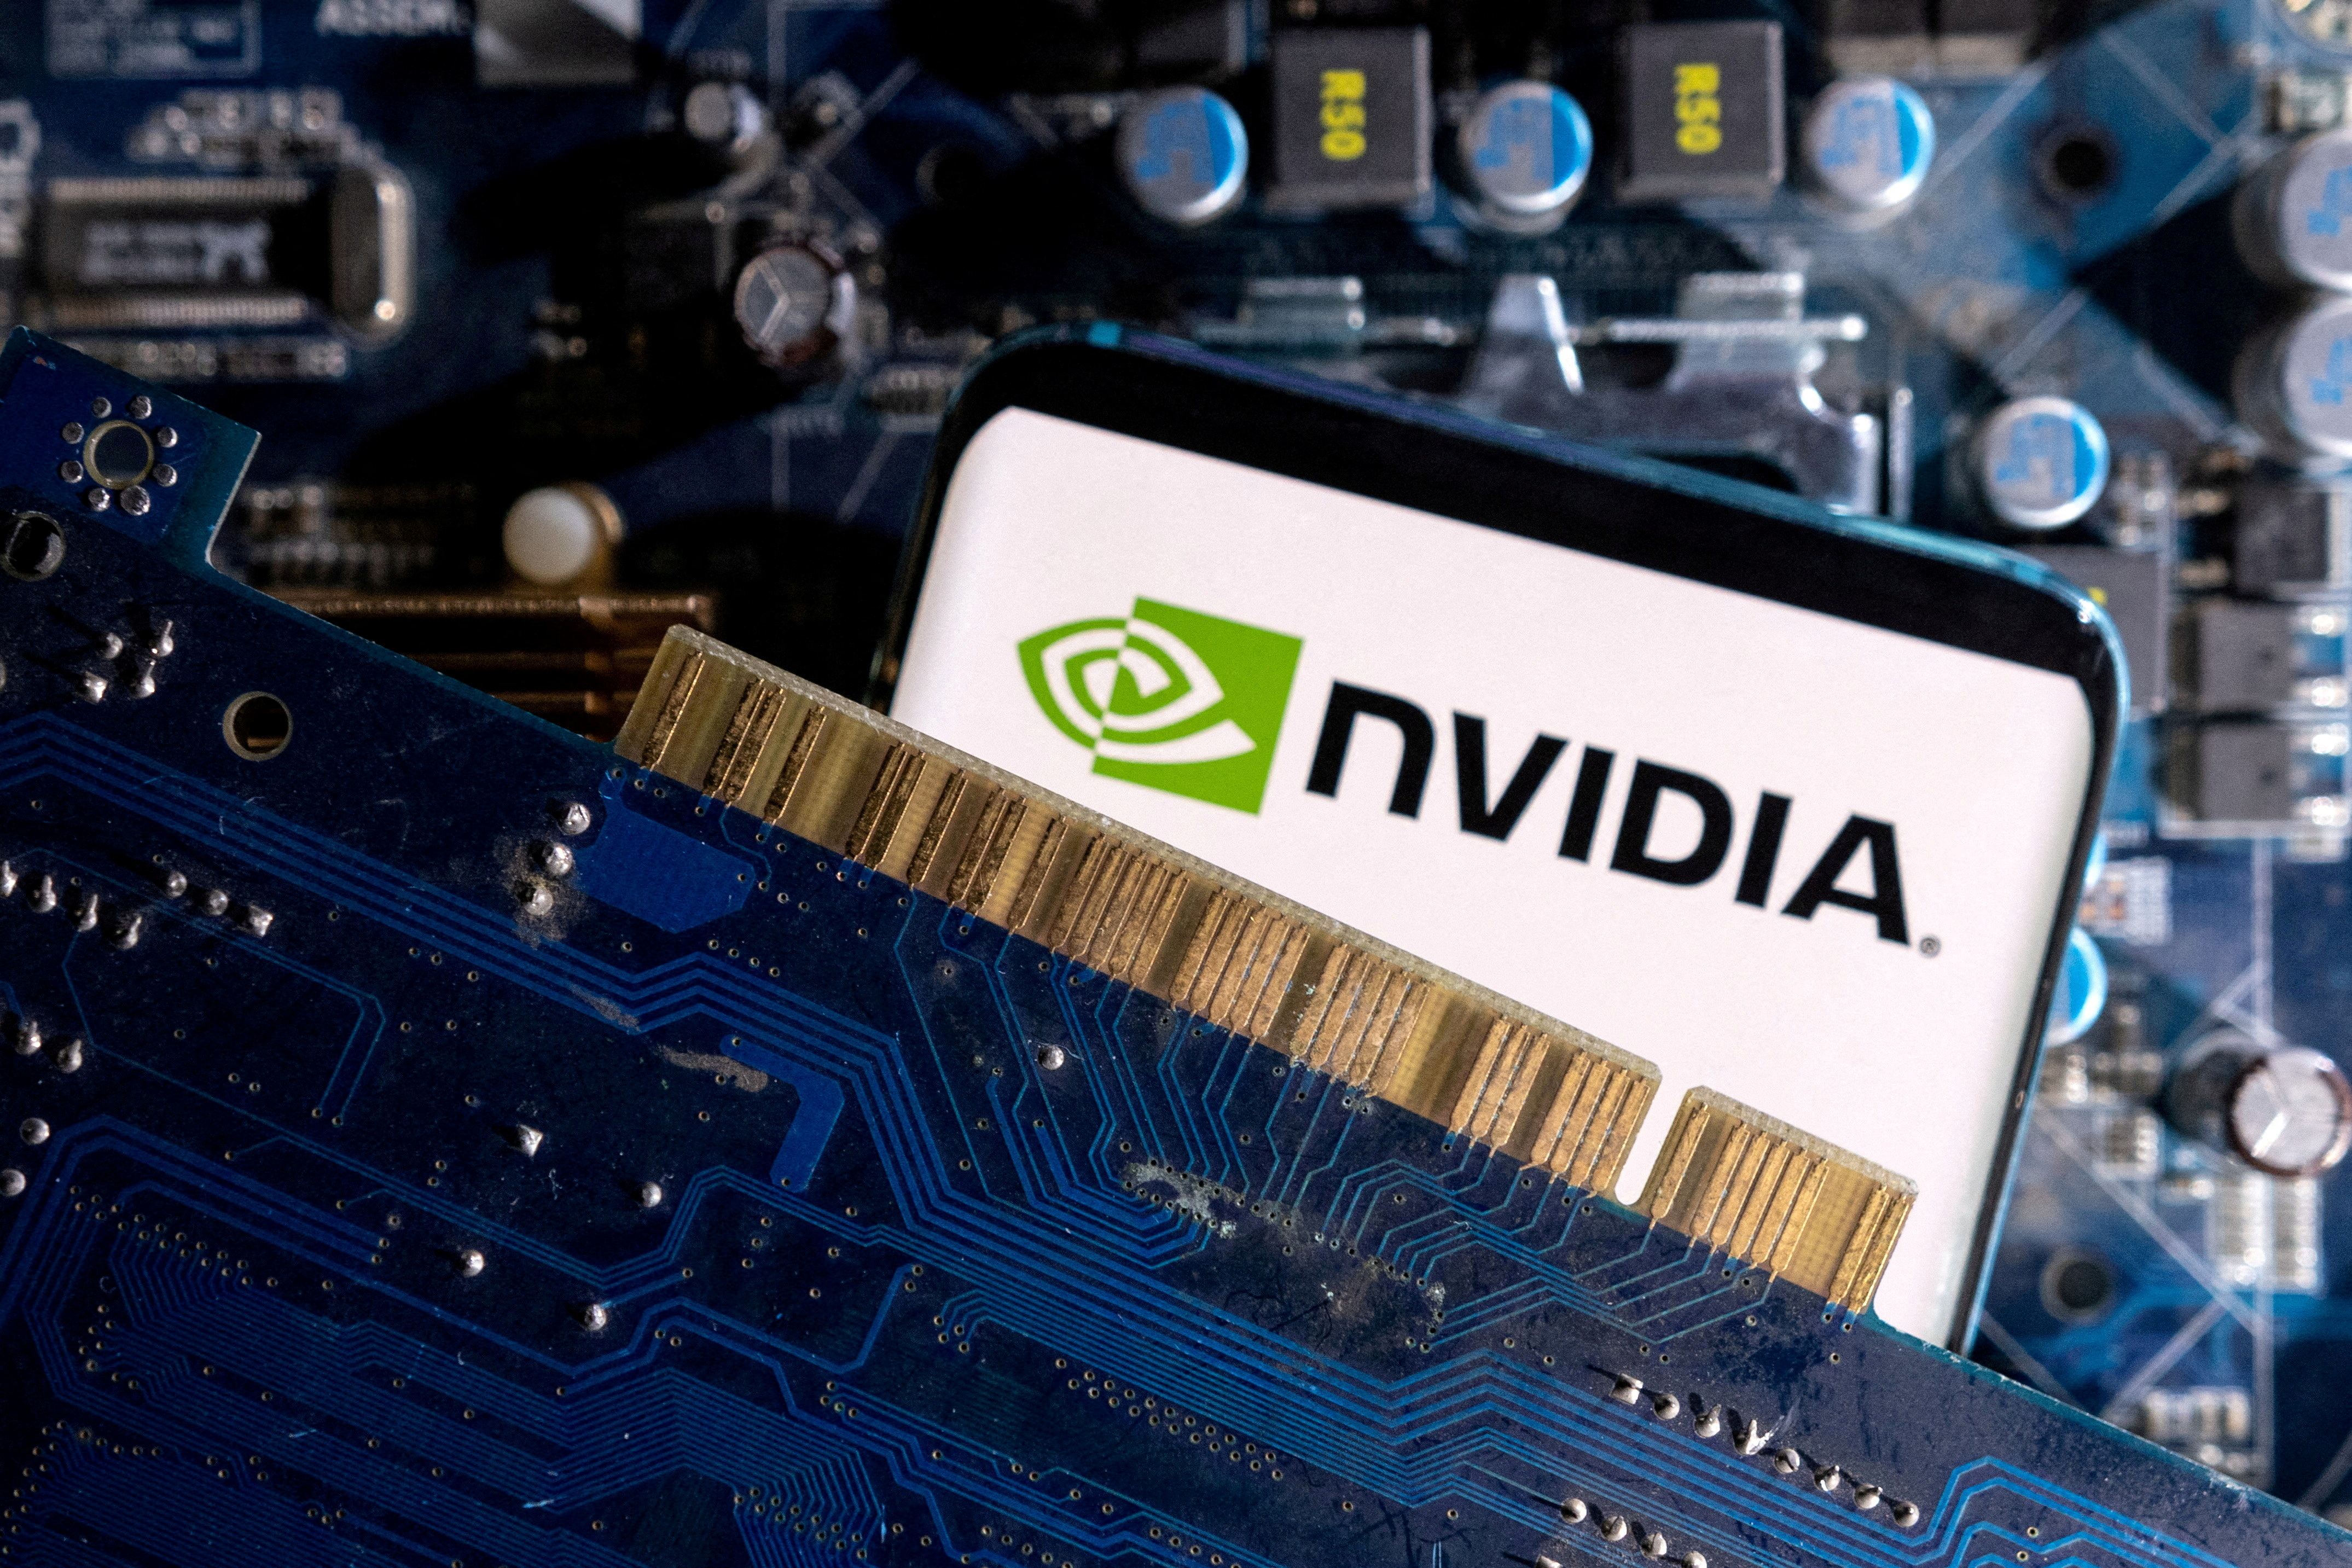 What Makes Nvidia's Chips The Greatest in the AI Sector?